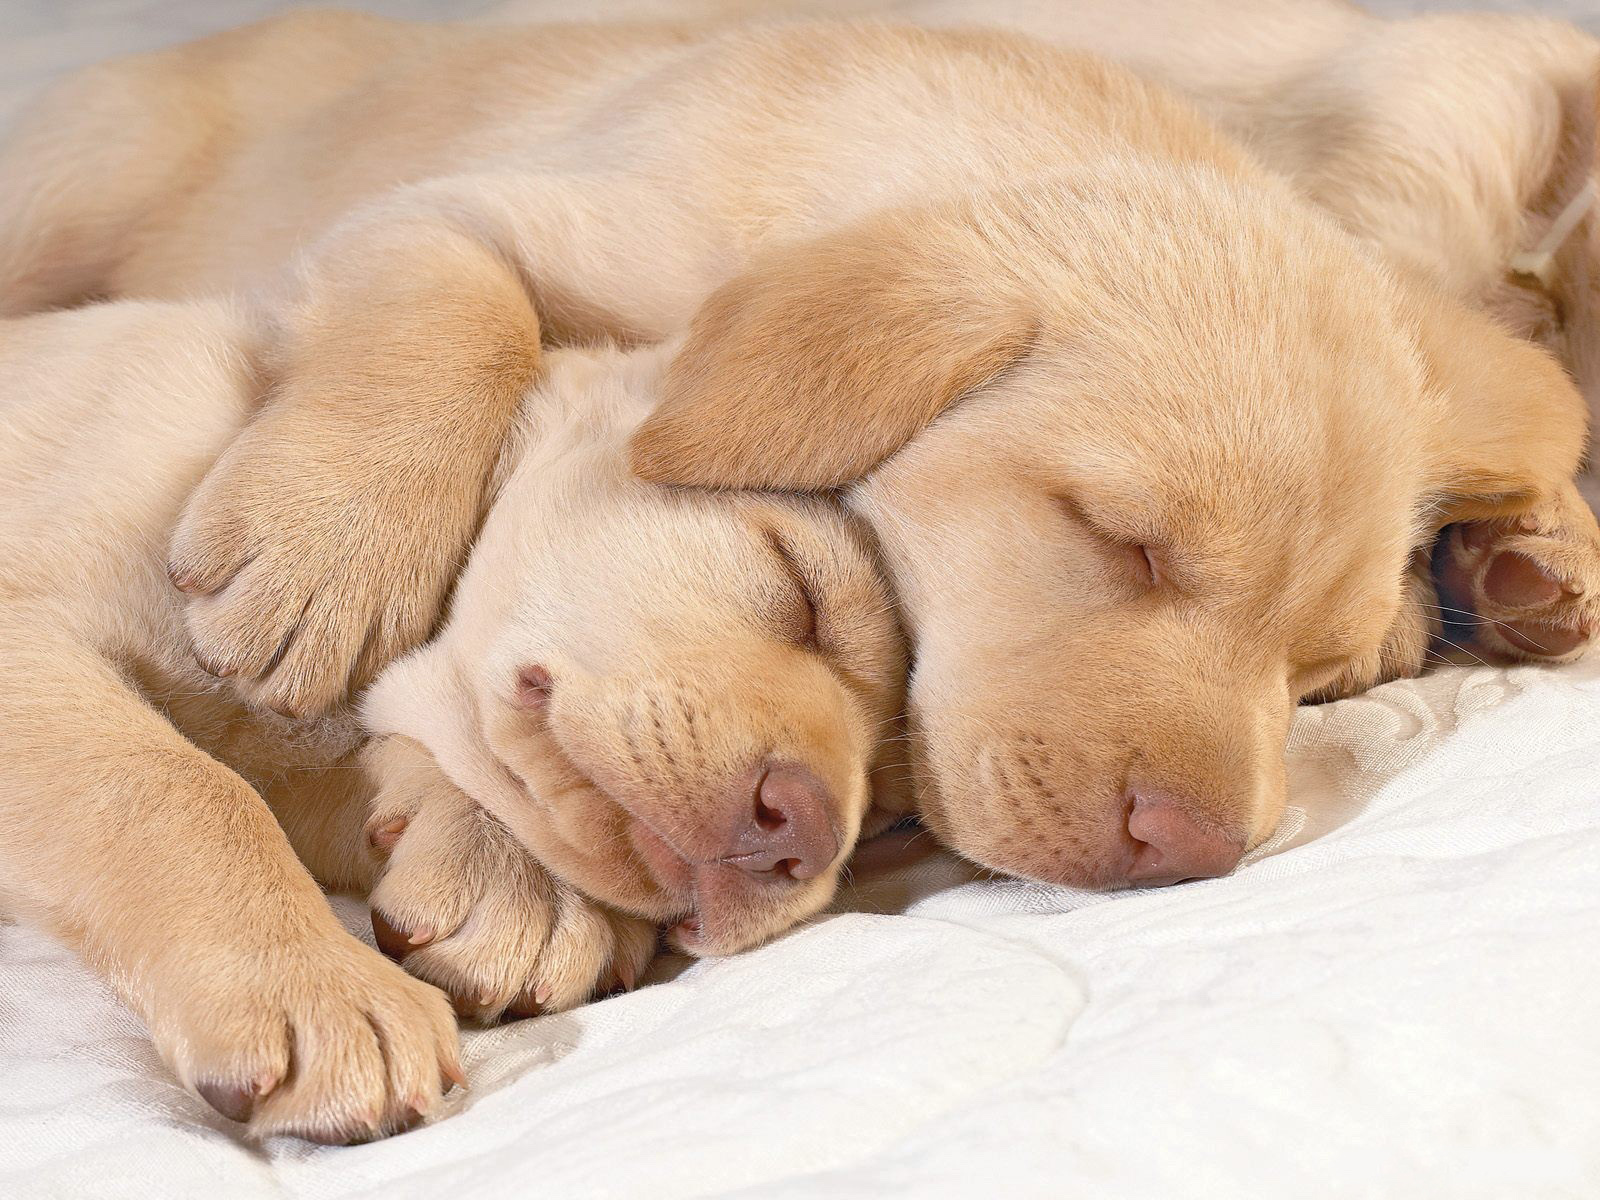 Two sleeping puppies cuddling each other.